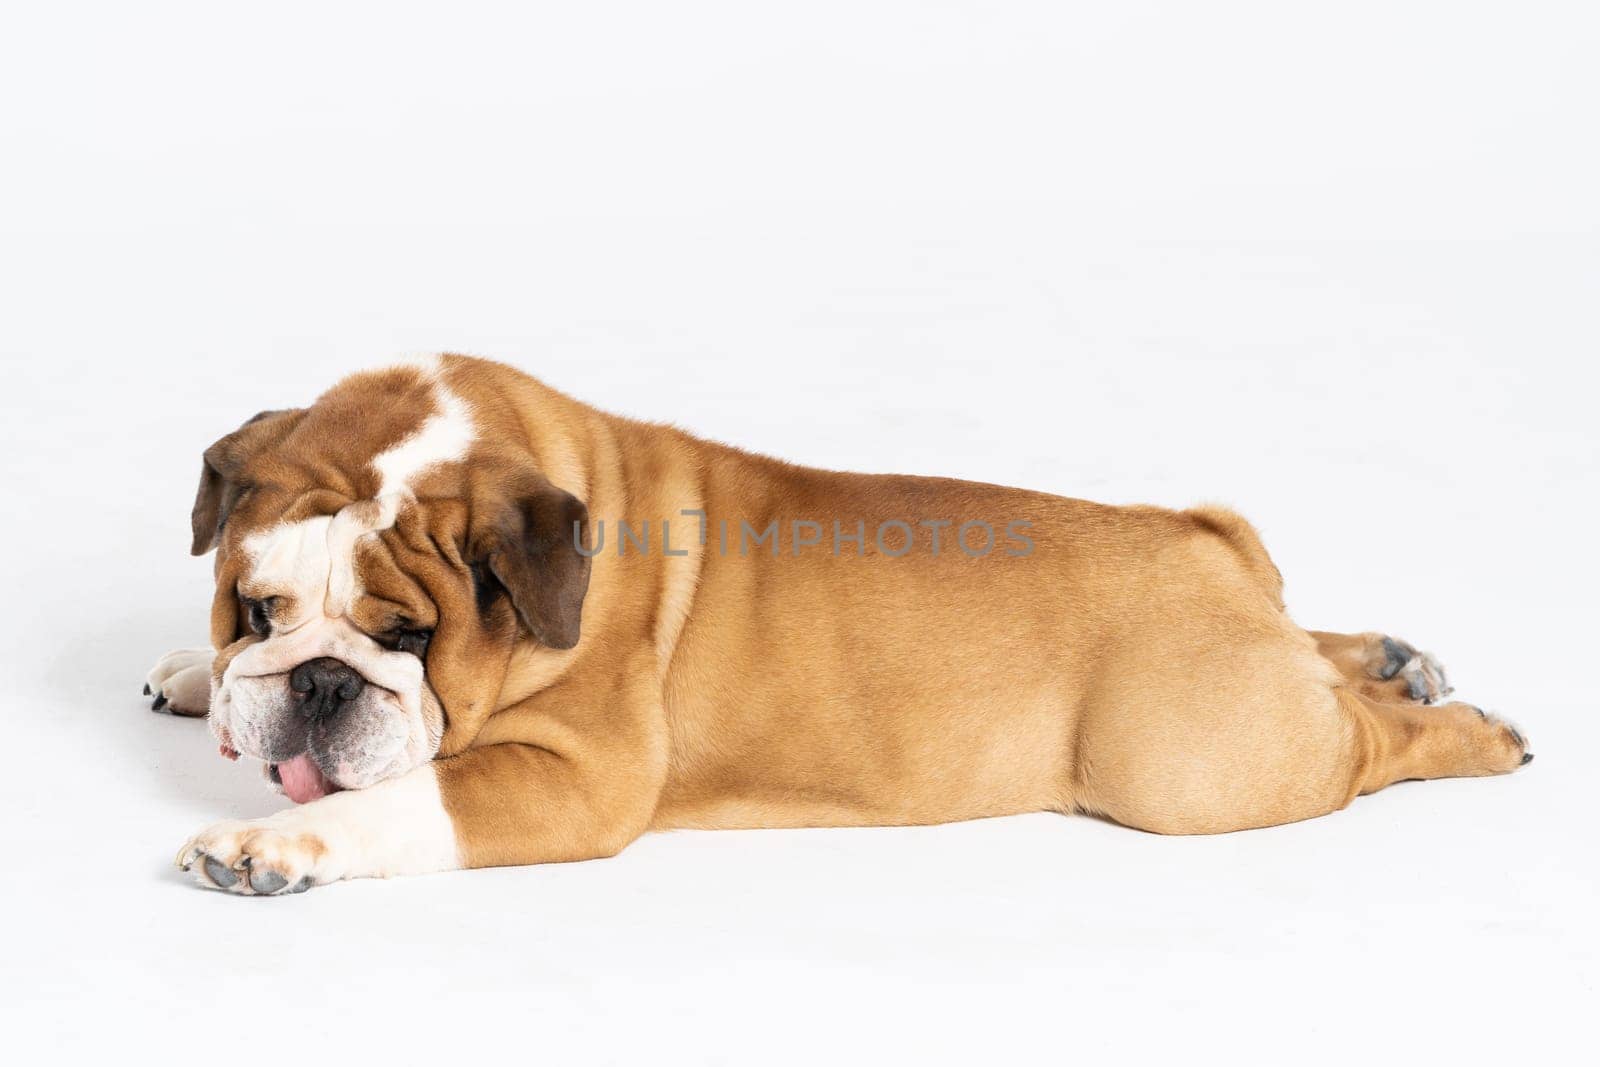 While resting, the dog licks its paws. The English Bulldog was bred as a companion and deterrent dog. A breed with a brown coat with white patches.